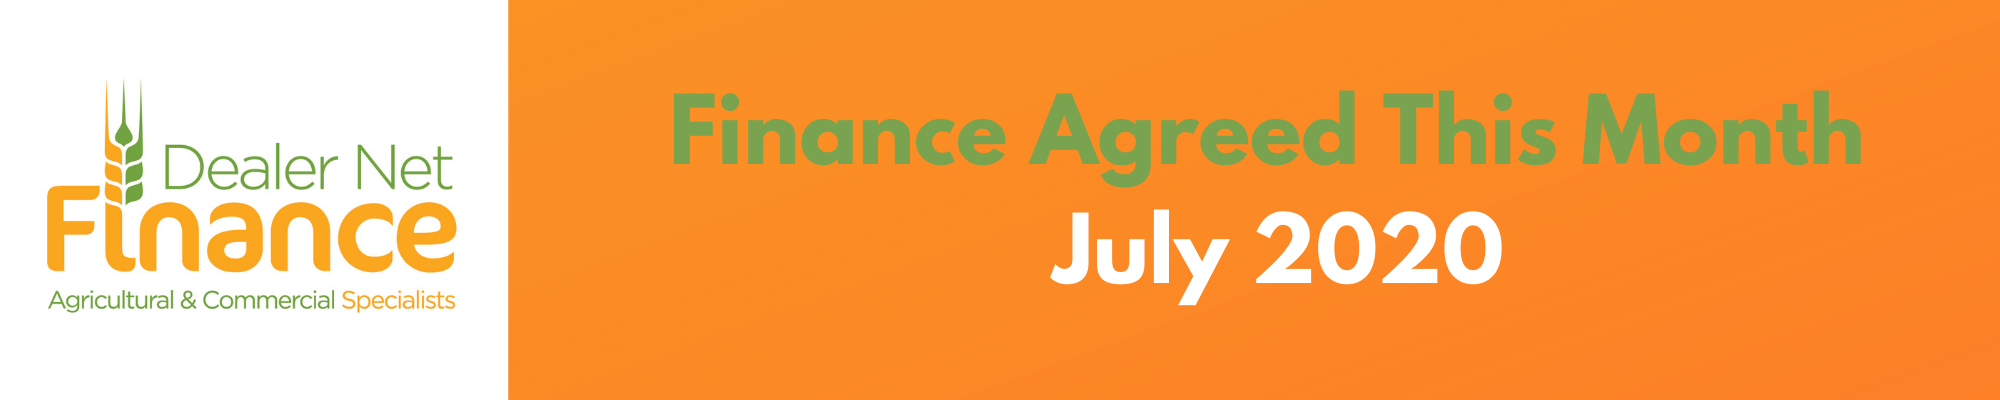 Finance Agreed This Month – July 2020